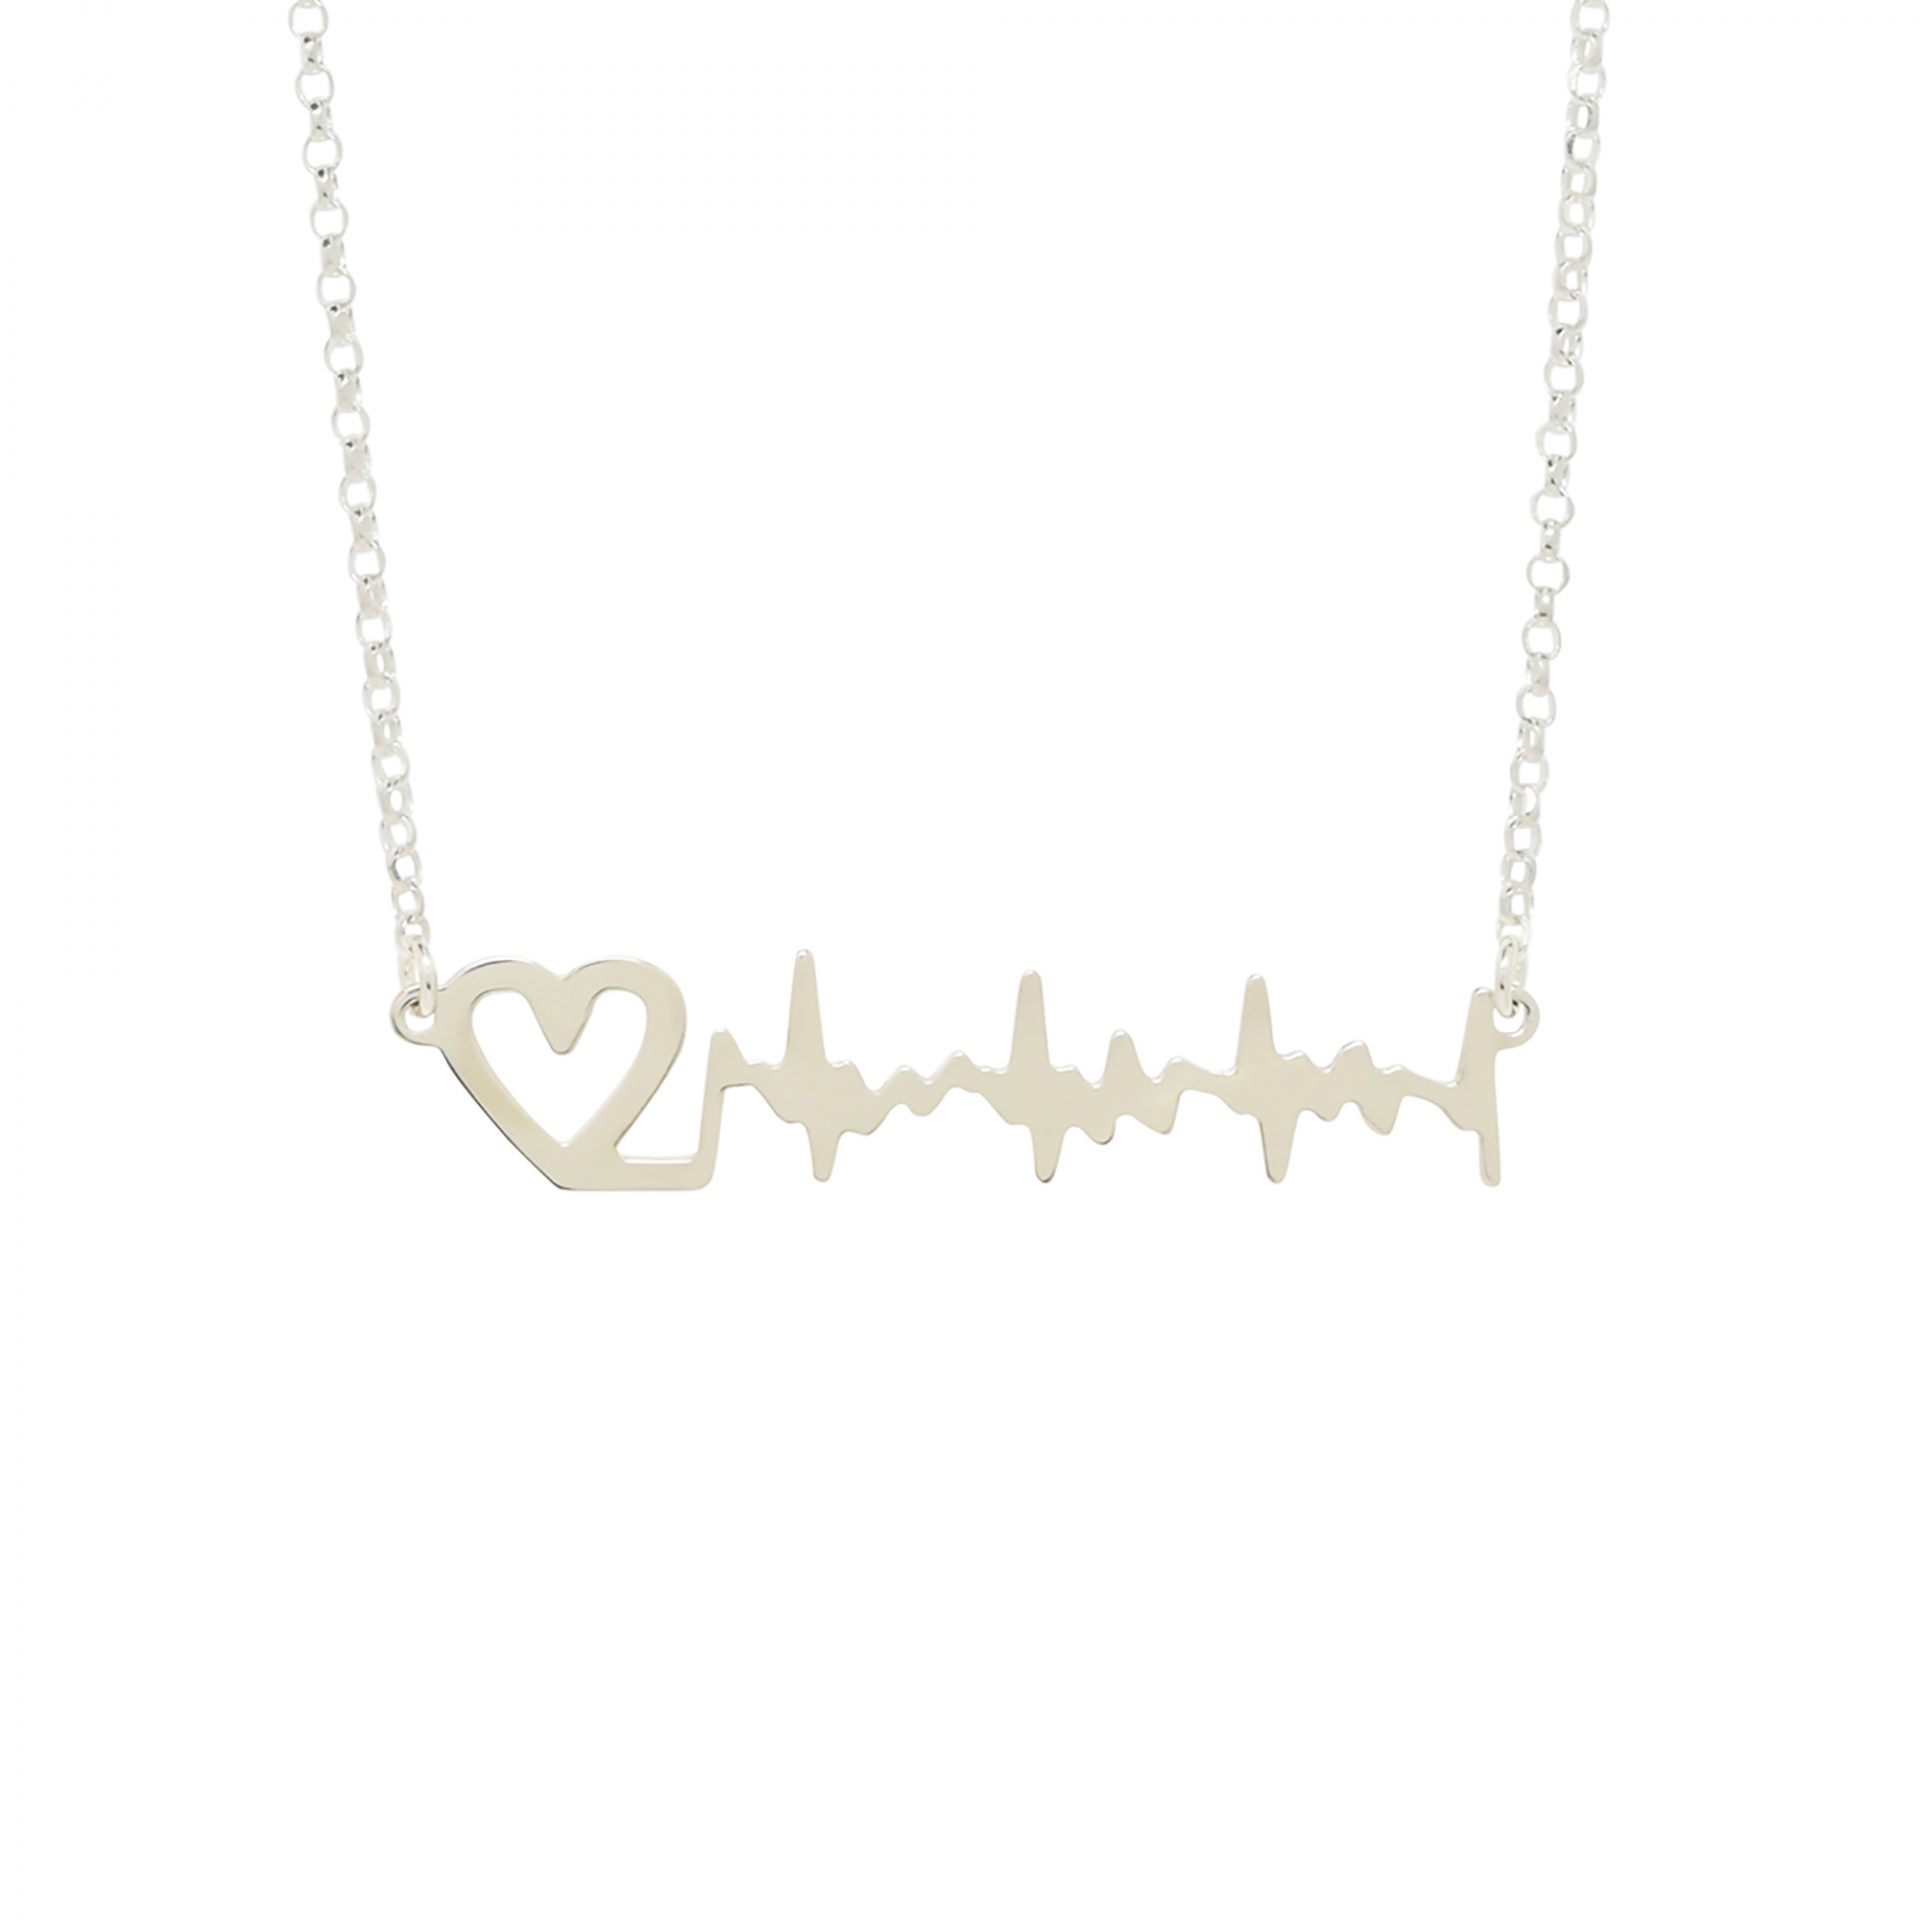 Original Cherished Heart Necklace in Sterling Silver on white background